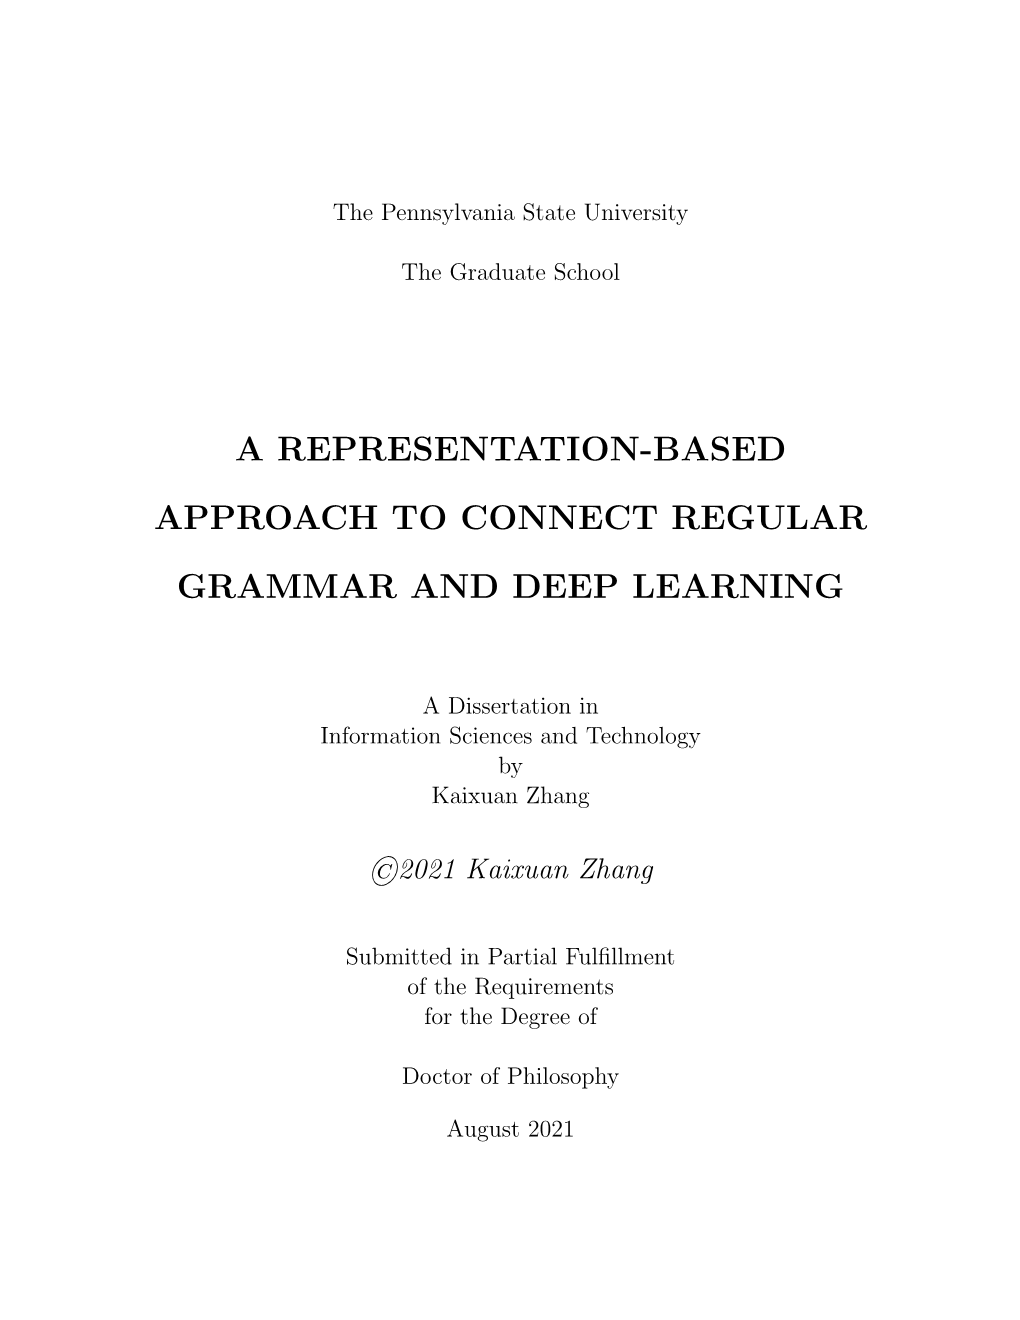 A Representation-Based Approach to Connect Regular Grammar and Deep Learning